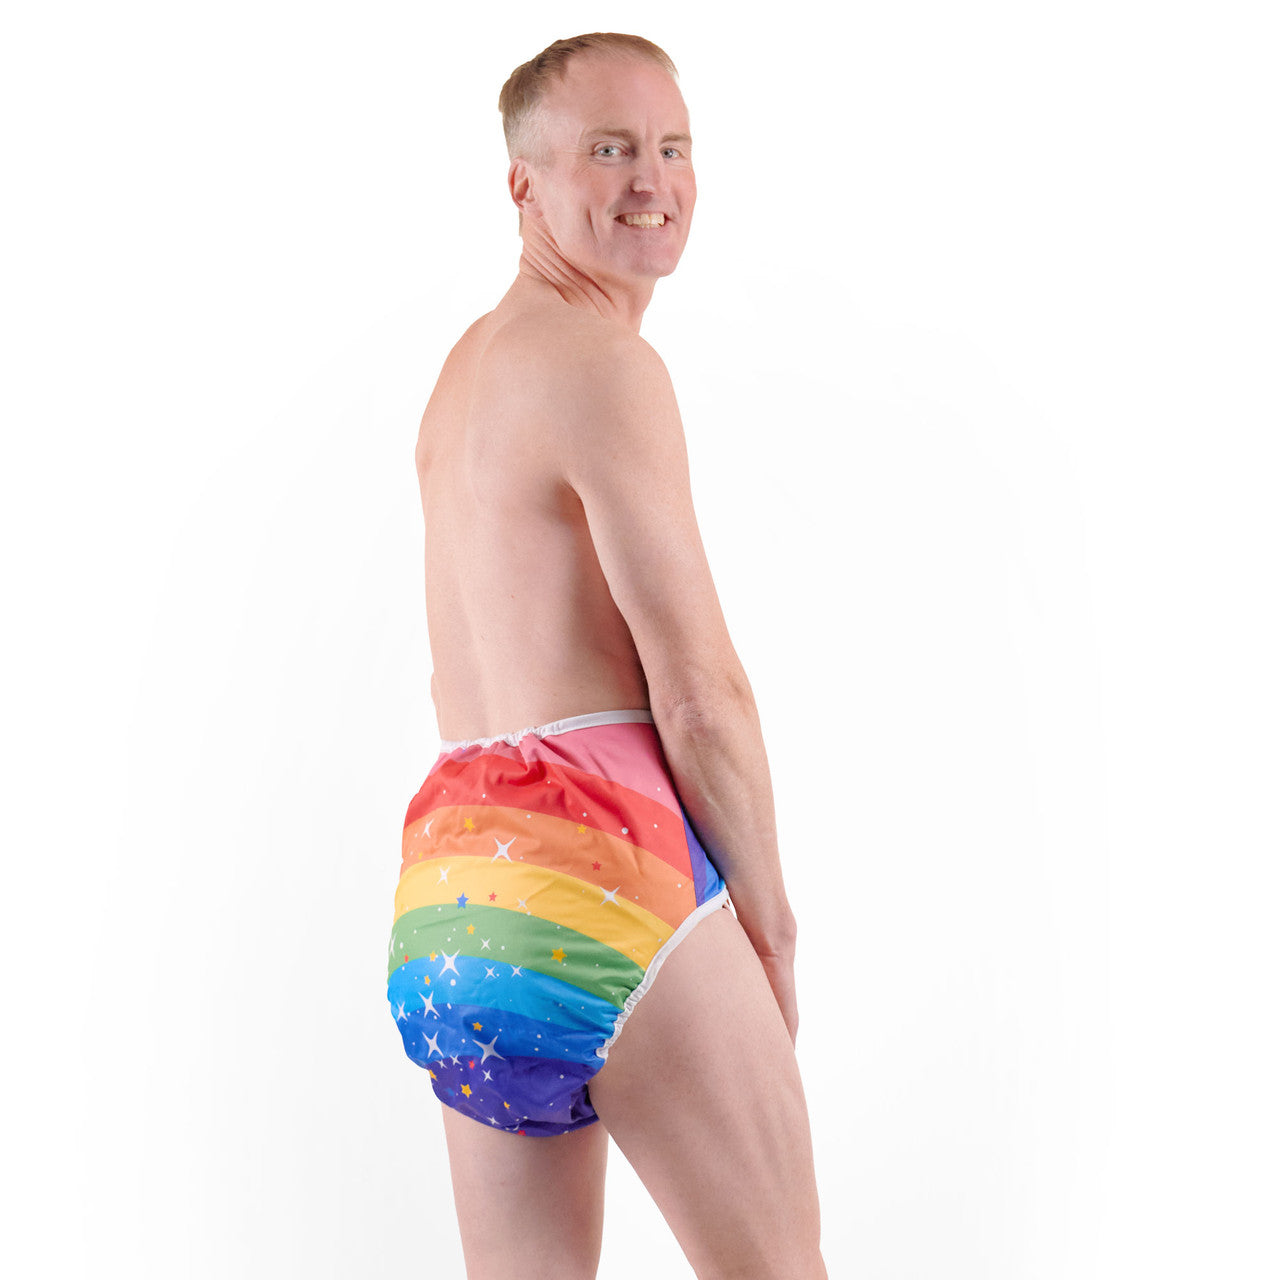 Rainbow Star Adult Diaper Wrap on masculine pale model